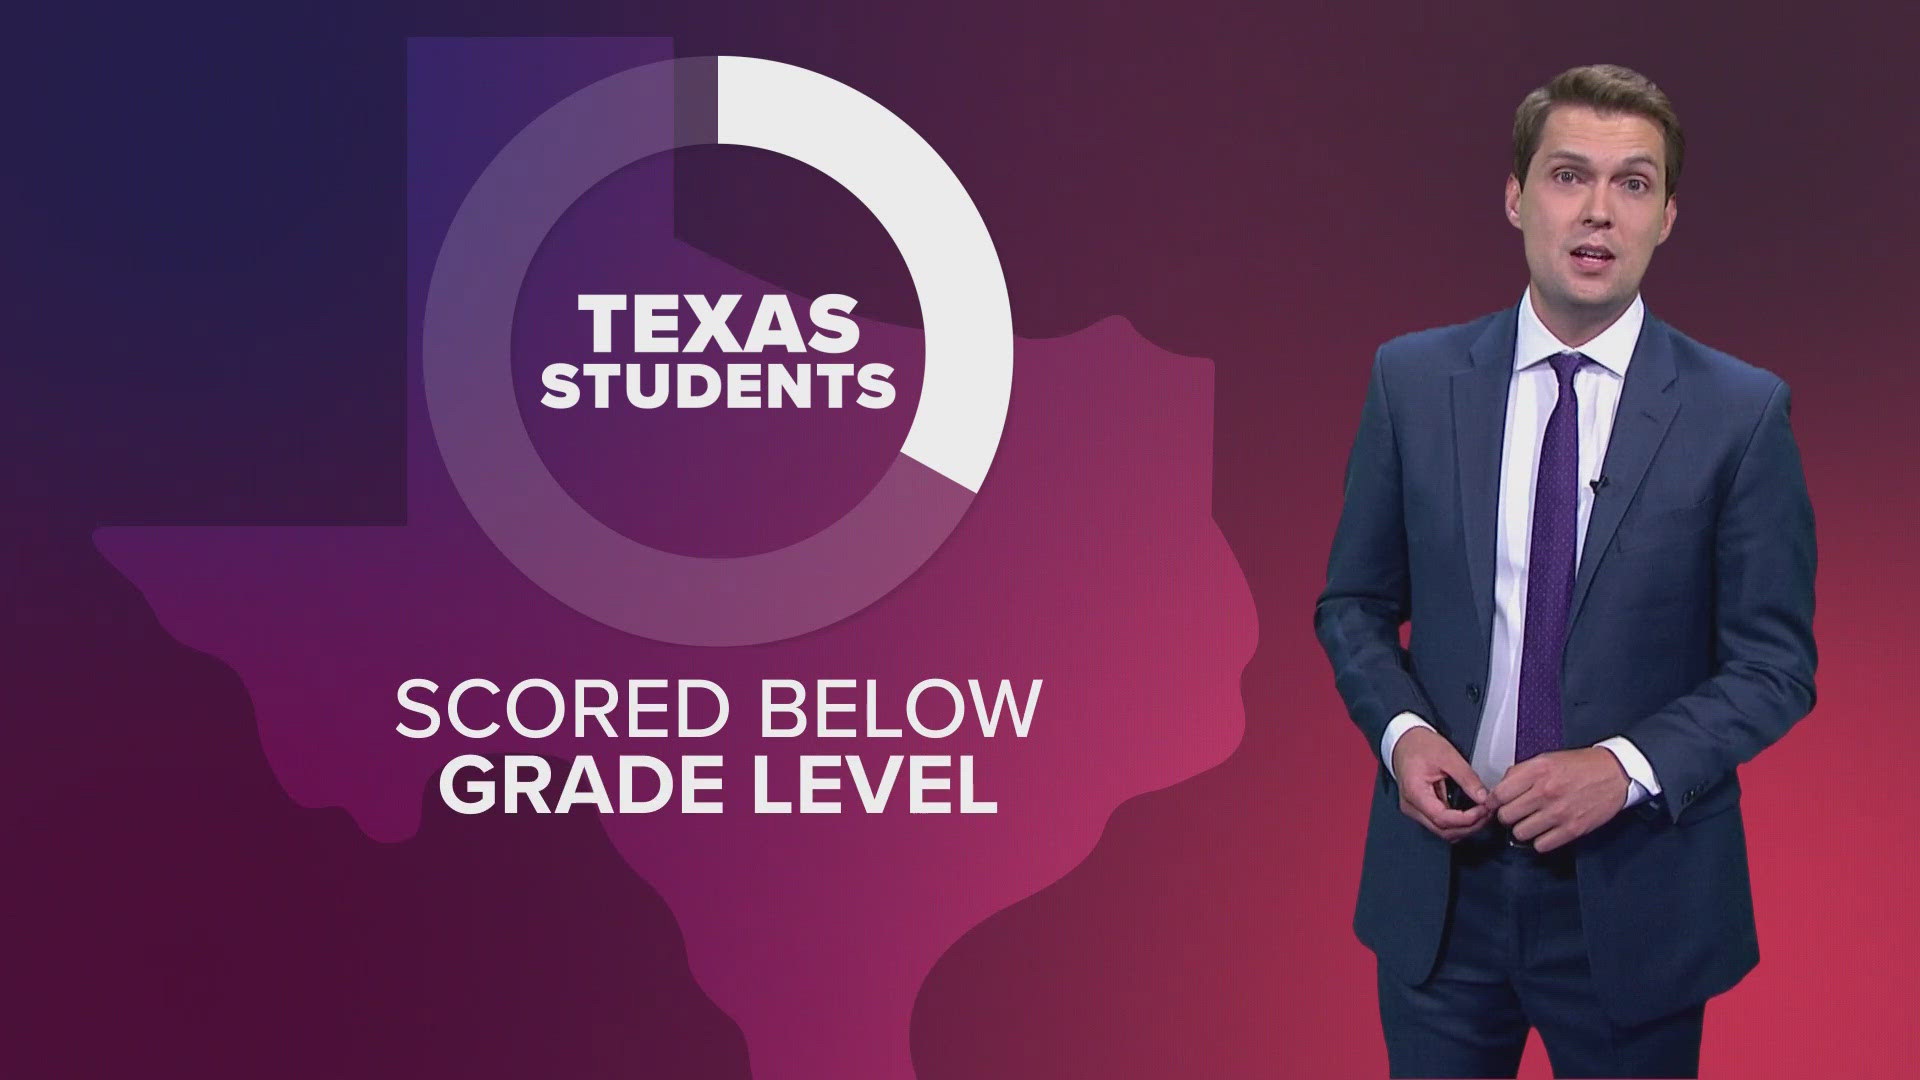 Many claim underperformance on the STAAR exams could be linked to the pandemic.